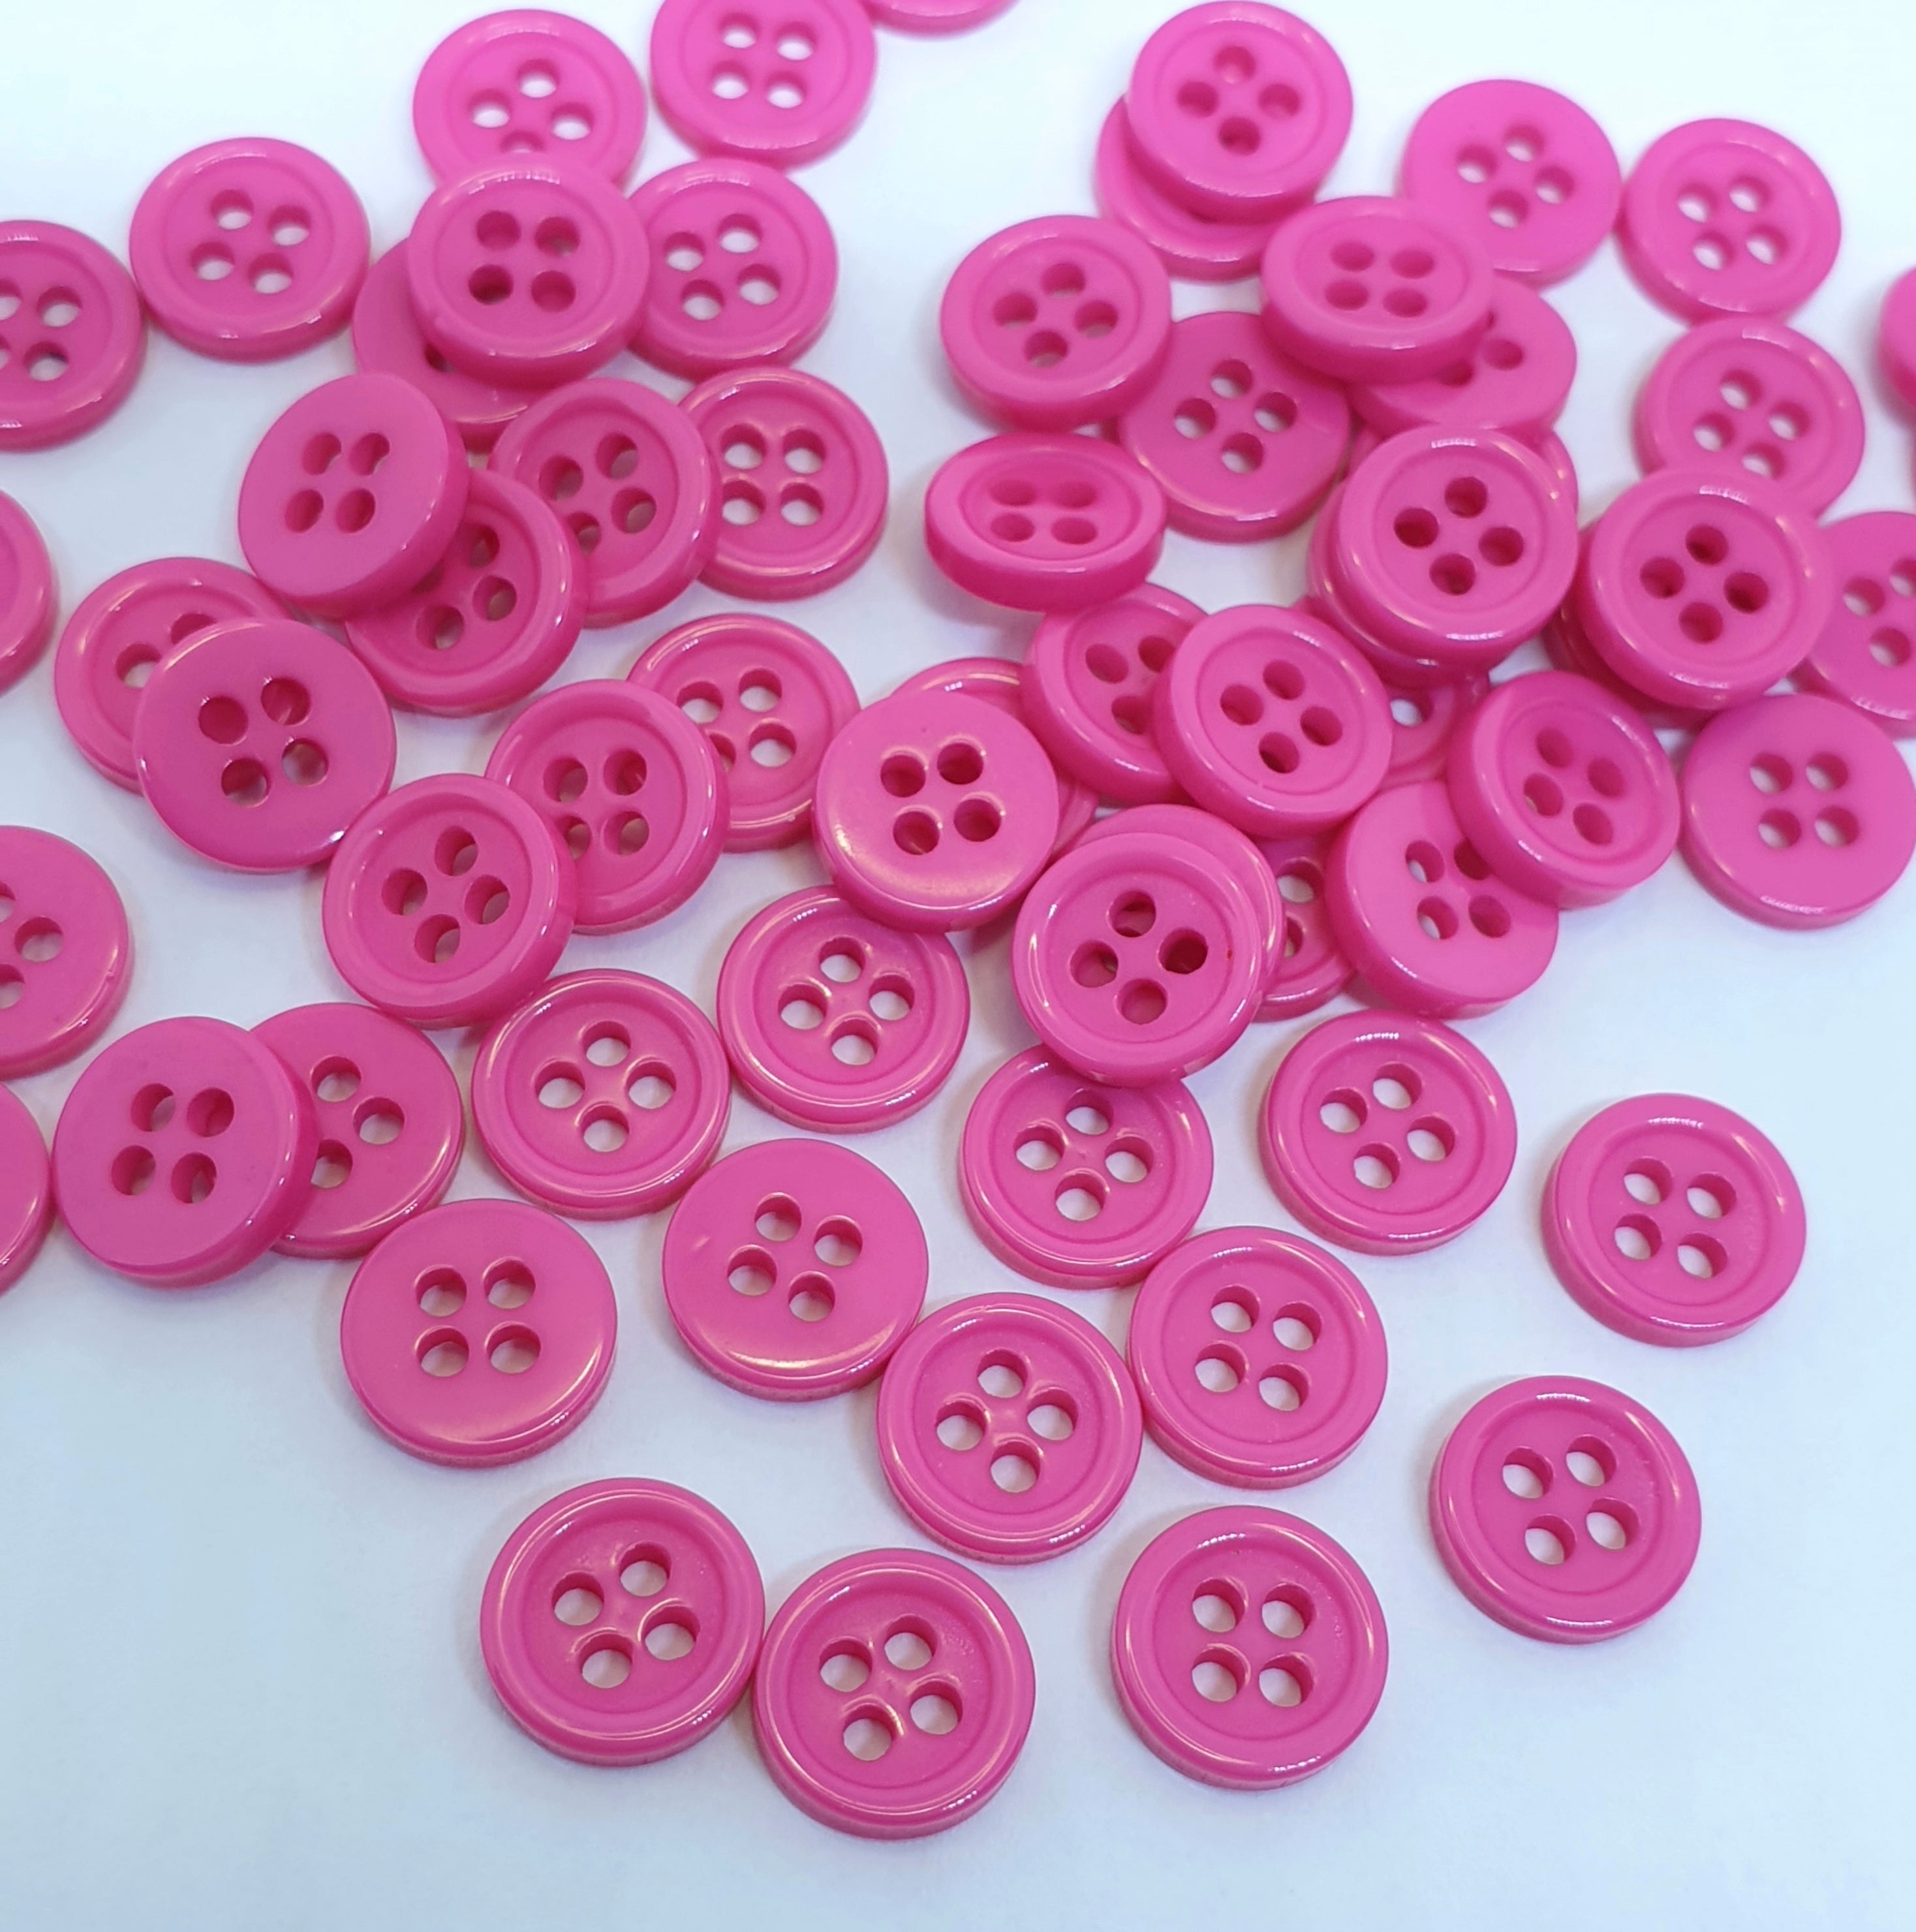 MajorCrafts 120pcs 9mm Hot Pink 4 Holes Small Round Resin Sewing Buttons